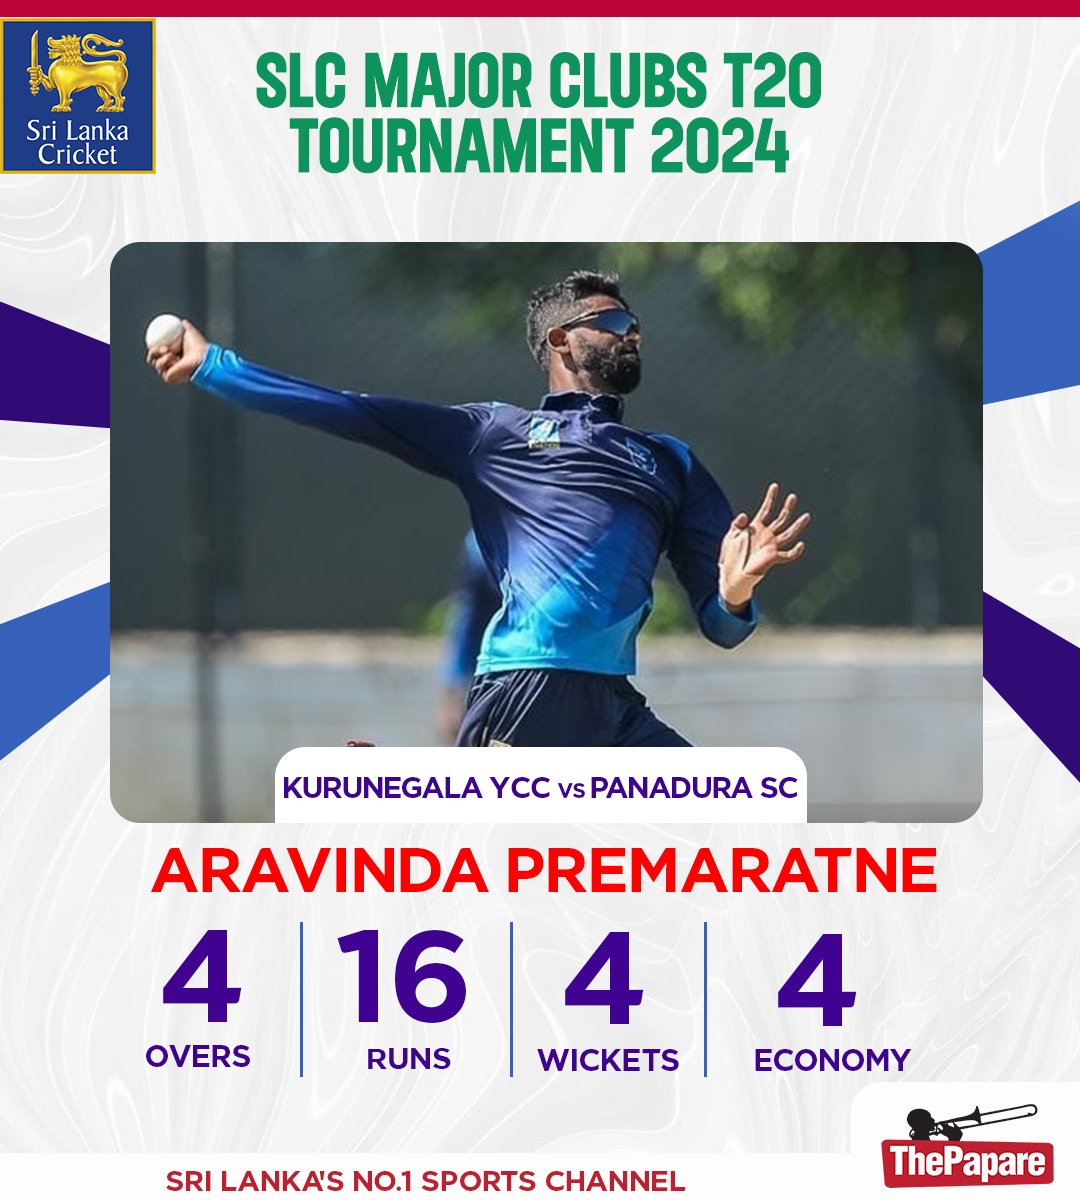 Top Performers (17th May) | SLC Major Clubs T20 Tournament 2024. #ClubCricket More 👉 bit.ly/TPCricket